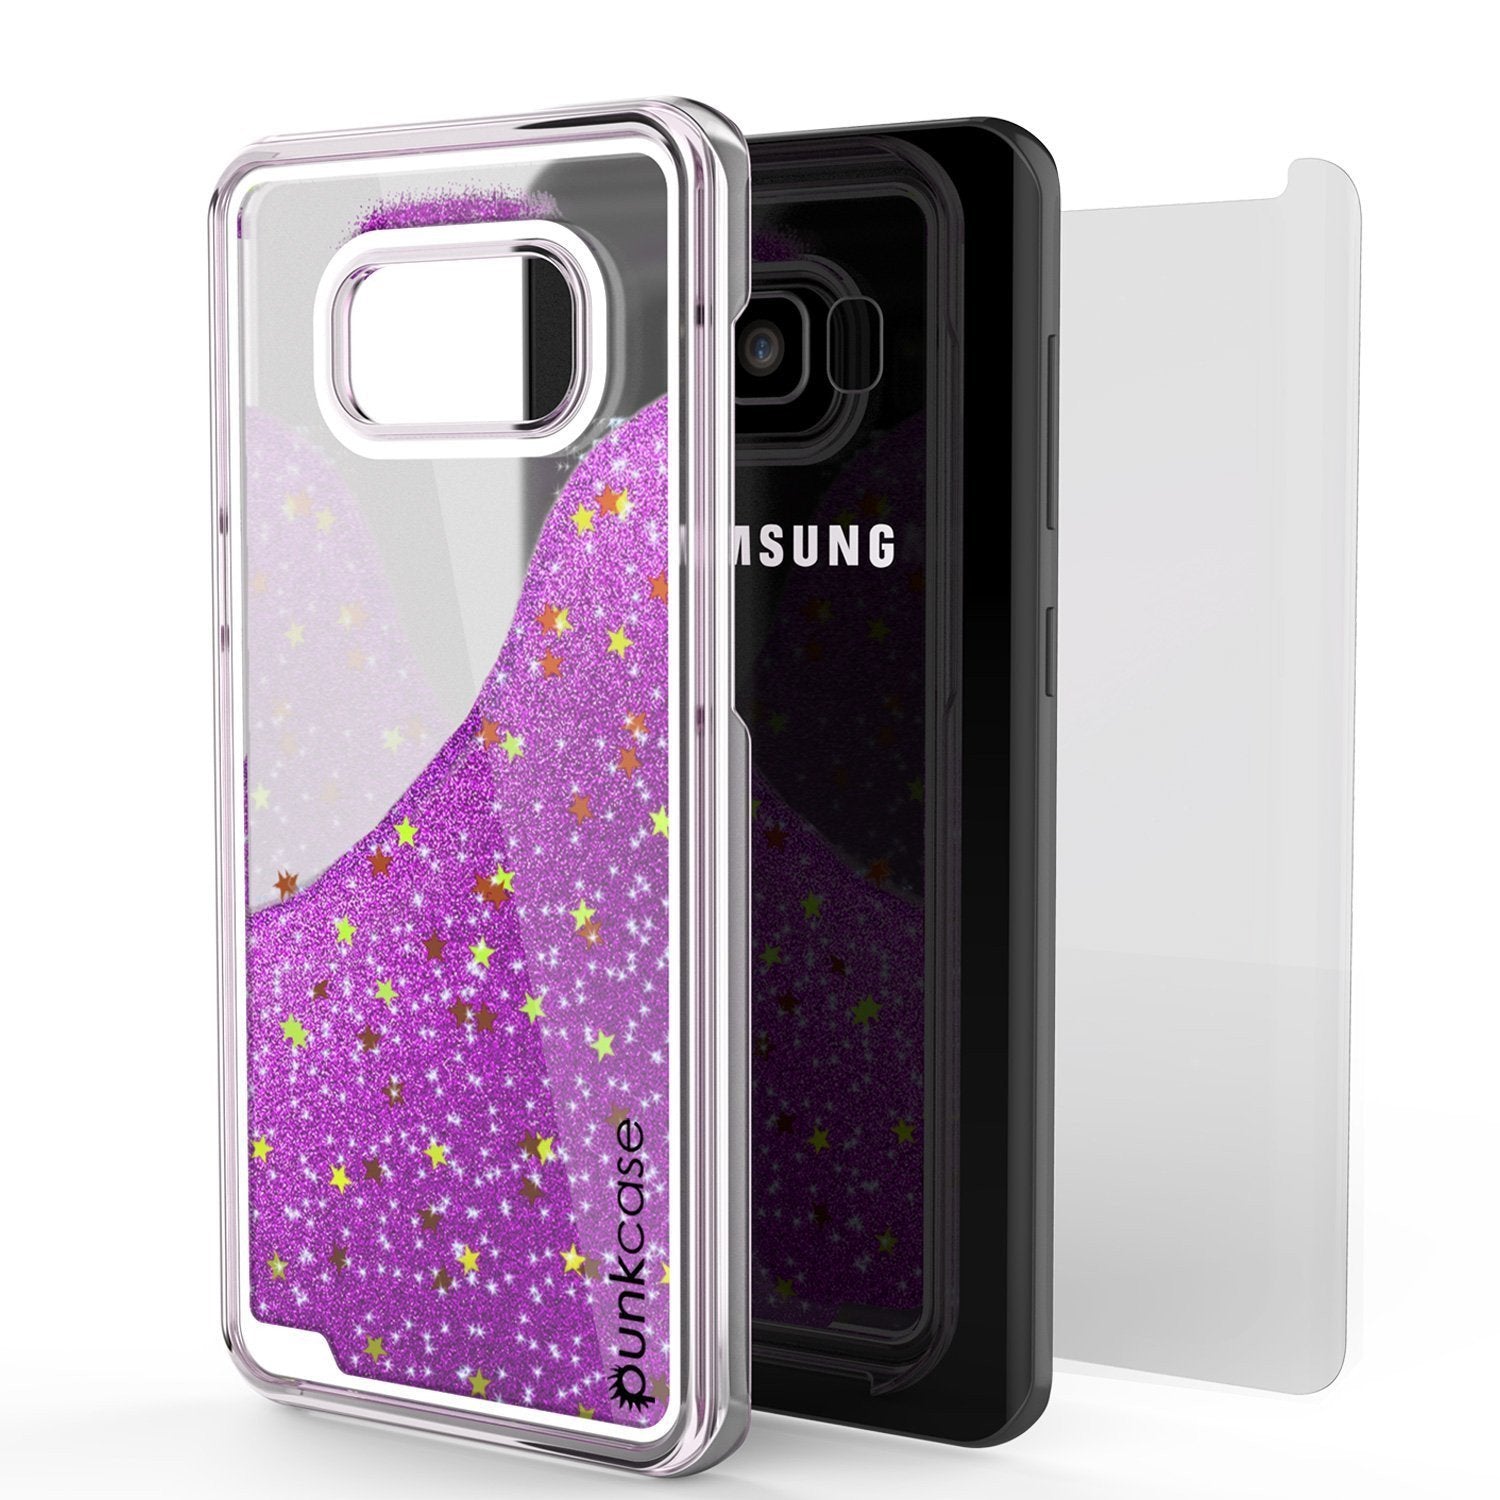 Galaxy S8 Case, Punkcase Liquid Purple Series Protective Dual Layer Floating Glitter Cover - PunkCase NZ